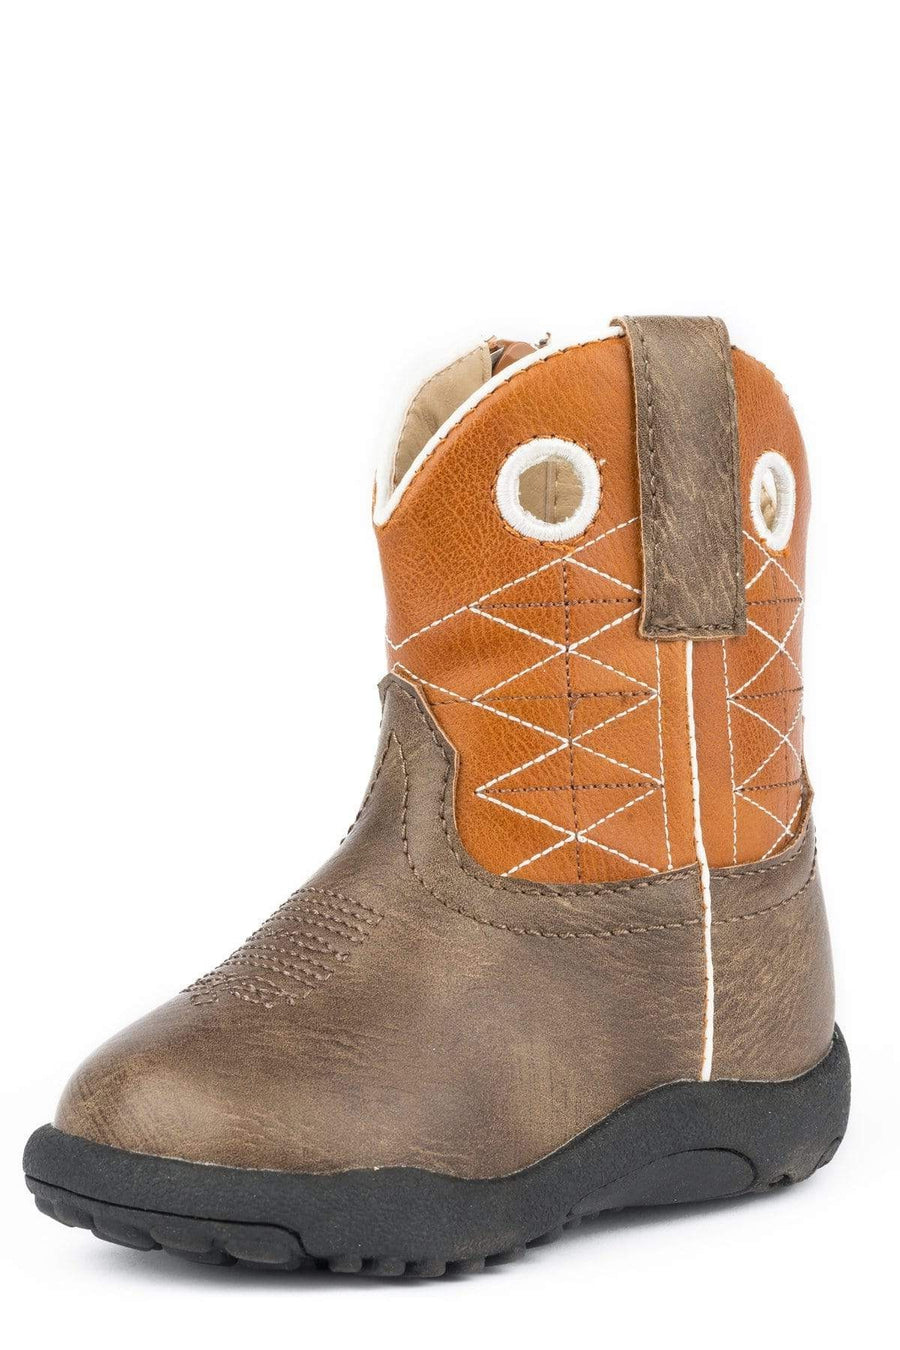 Roper Infants Boone- Brown Boots - Gympie Saddleworld & Country Clothing